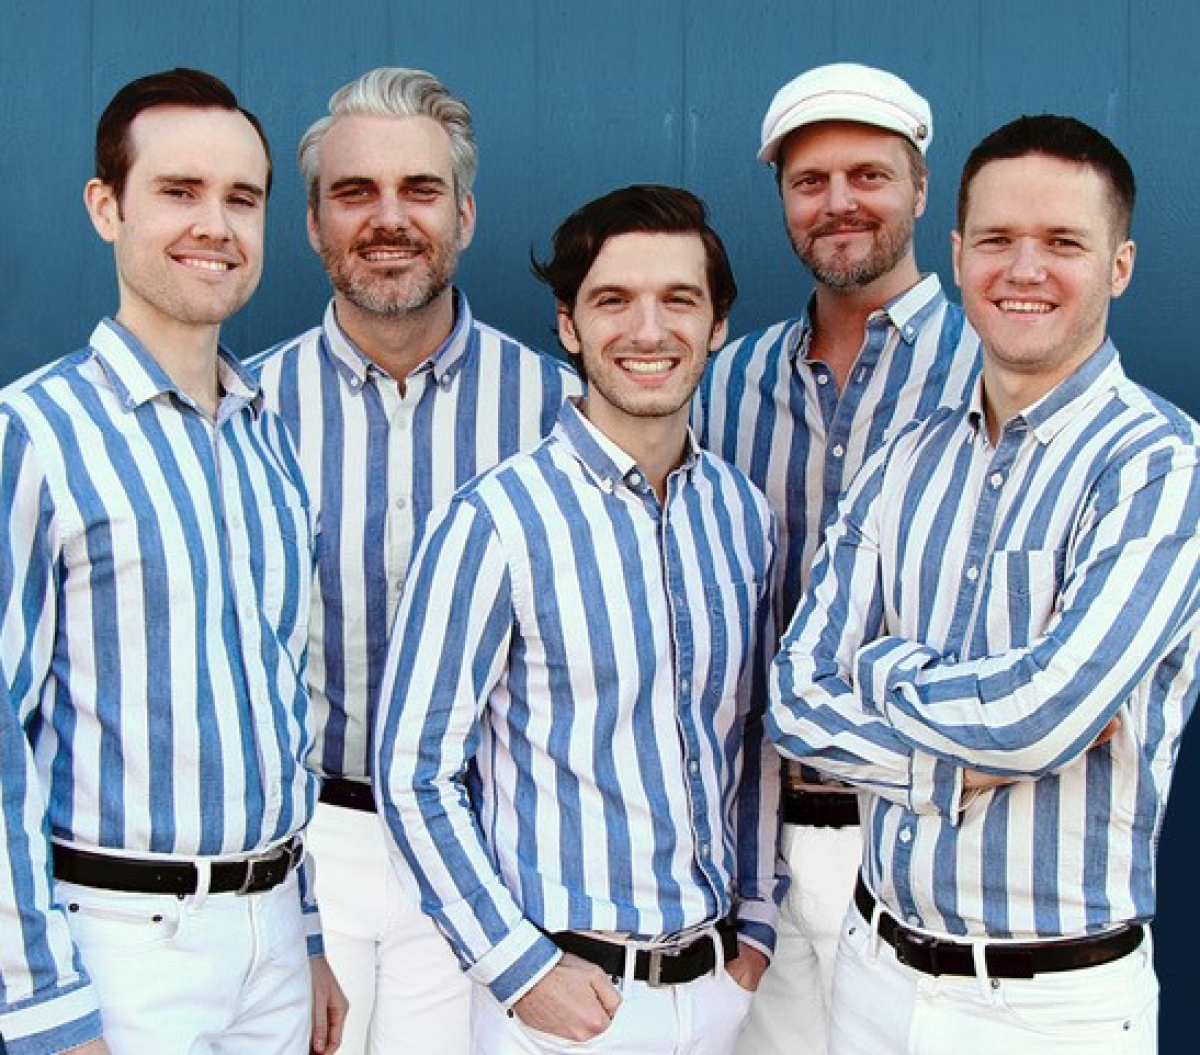 “Sail on! The Beach Boys Tribute” concert will take place Jan. 13, 2023.